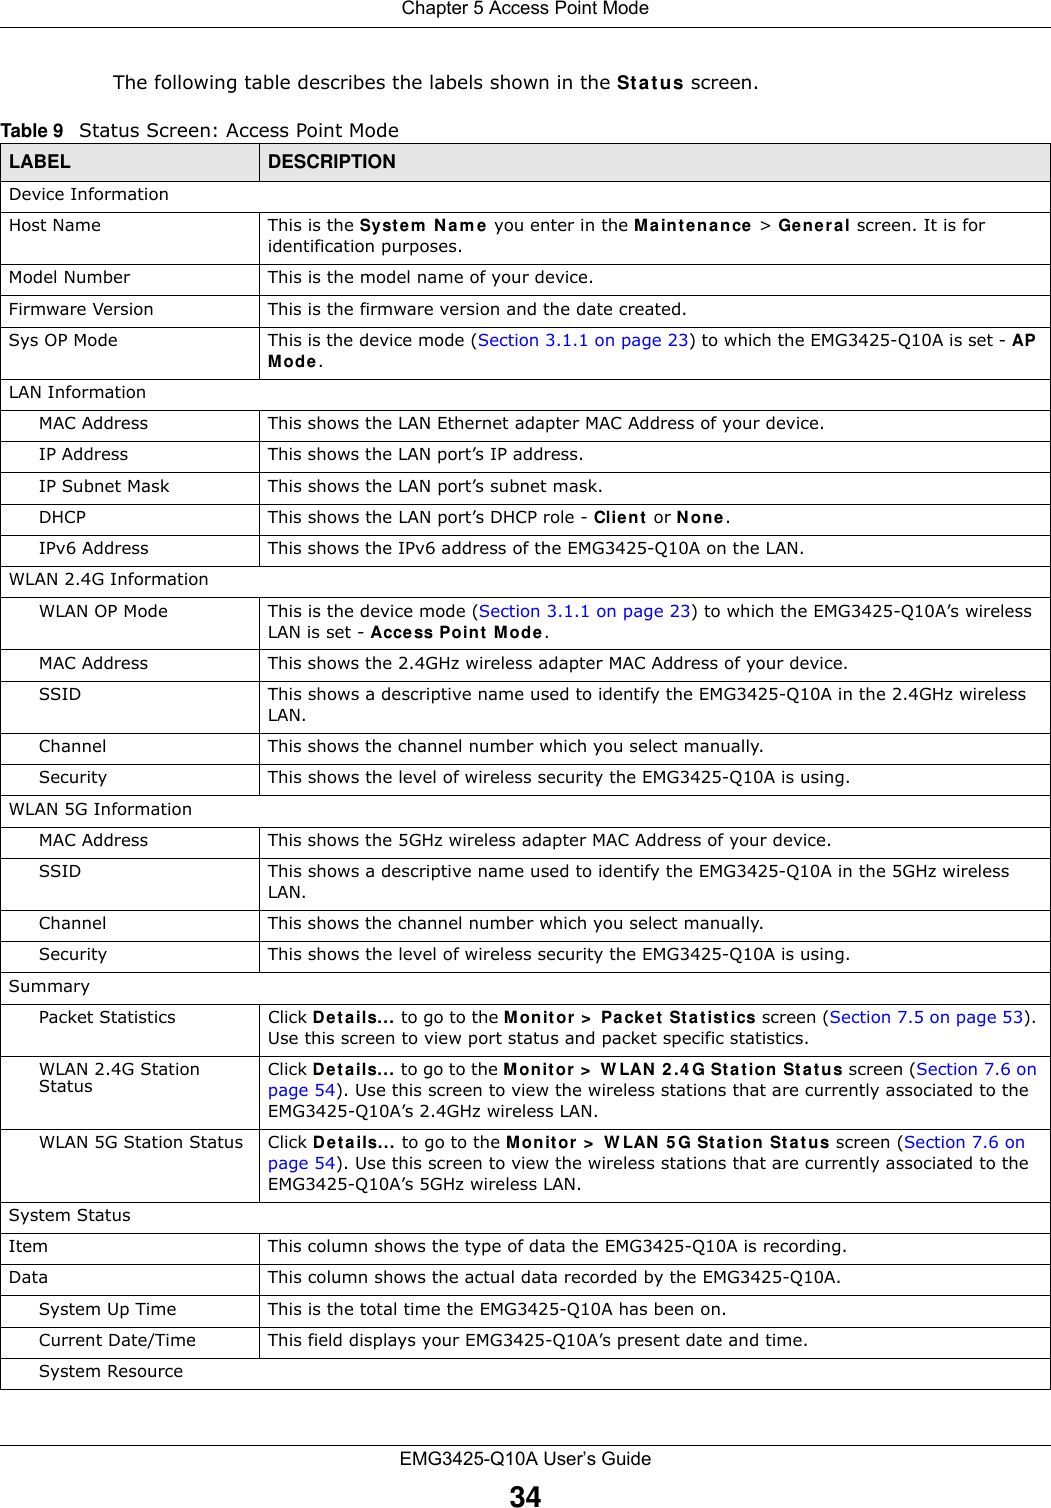 Chapter 5 Access Point ModeEMG3425-Q10A User’s Guide34The following table describes the labels shown in the St a t us screen.  Table 9   Status Screen: Access Point Mode  LABEL DESCRIPTIONDevice InformationHost Name This is the Syst em  N a m e  you enter in the M a int e n a nce  &gt; Ge neral screen. It is for identification purposes.Model Number This is the model name of your device.Firmware Version This is the firmware version and the date created. Sys OP Mode This is the device mode (Section 3.1.1 on page 23) to which the EMG3425-Q10A is set - AP Mode.LAN InformationMAC Address This shows the LAN Ethernet adapter MAC Address of your device.IP Address This shows the LAN port’s IP address.IP Subnet Mask This shows the LAN port’s subnet mask.DHCP This shows the LAN port’s DHCP role - Clie n t  or N on e.IPv6 Address This shows the IPv6 address of the EMG3425-Q10A on the LAN.WLAN 2.4G InformationWLAN OP Mode This is the device mode (Section 3.1.1 on page 23) to which the EMG3425-Q10A’s wireless LAN is set - Acce ss Poin t  M ode .MAC Address This shows the 2.4GHz wireless adapter MAC Address of your device.SSID This shows a descriptive name used to identify the EMG3425-Q10A in the 2.4GHz wireless LAN. Channel This shows the channel number which you select manually.Security This shows the level of wireless security the EMG3425-Q10A is using.WLAN 5G InformationMAC Address This shows the 5GHz wireless adapter MAC Address of your device.SSID This shows a descriptive name used to identify the EMG3425-Q10A in the 5GHz wireless LAN. Channel This shows the channel number which you select manually.Security This shows the level of wireless security the EMG3425-Q10A is using.SummaryPacket Statistics Click De t a ils.. . to go to the Monitor  &gt;  Pack et  St a t istics screen (Section 7.5 on page 53). Use this screen to view port status and packet specific statistics.WLAN 2.4G Station Status Click D e t a ils... to go to the M on it or &gt;  W LAN  2 .4 G Station St atus screen (Section 7.6 on page 54). Use this screen to view the wireless stations that are currently associated to the EMG3425-Q10A’s 2.4GHz wireless LAN.WLAN 5G Station Status Click D et ai ls. .. to go to the M onit or &gt;  W LAN 5 G St a t ion St atus screen (Section 7.6 on page 54). Use this screen to view the wireless stations that are currently associated to the EMG3425-Q10A’s 5GHz wireless LAN.System StatusItem This column shows the type of data the EMG3425-Q10A is recording.Data This column shows the actual data recorded by the EMG3425-Q10A.System Up Time This is the total time the EMG3425-Q10A has been on.Current Date/Time This field displays your EMG3425-Q10A’s present date and time.System Resource